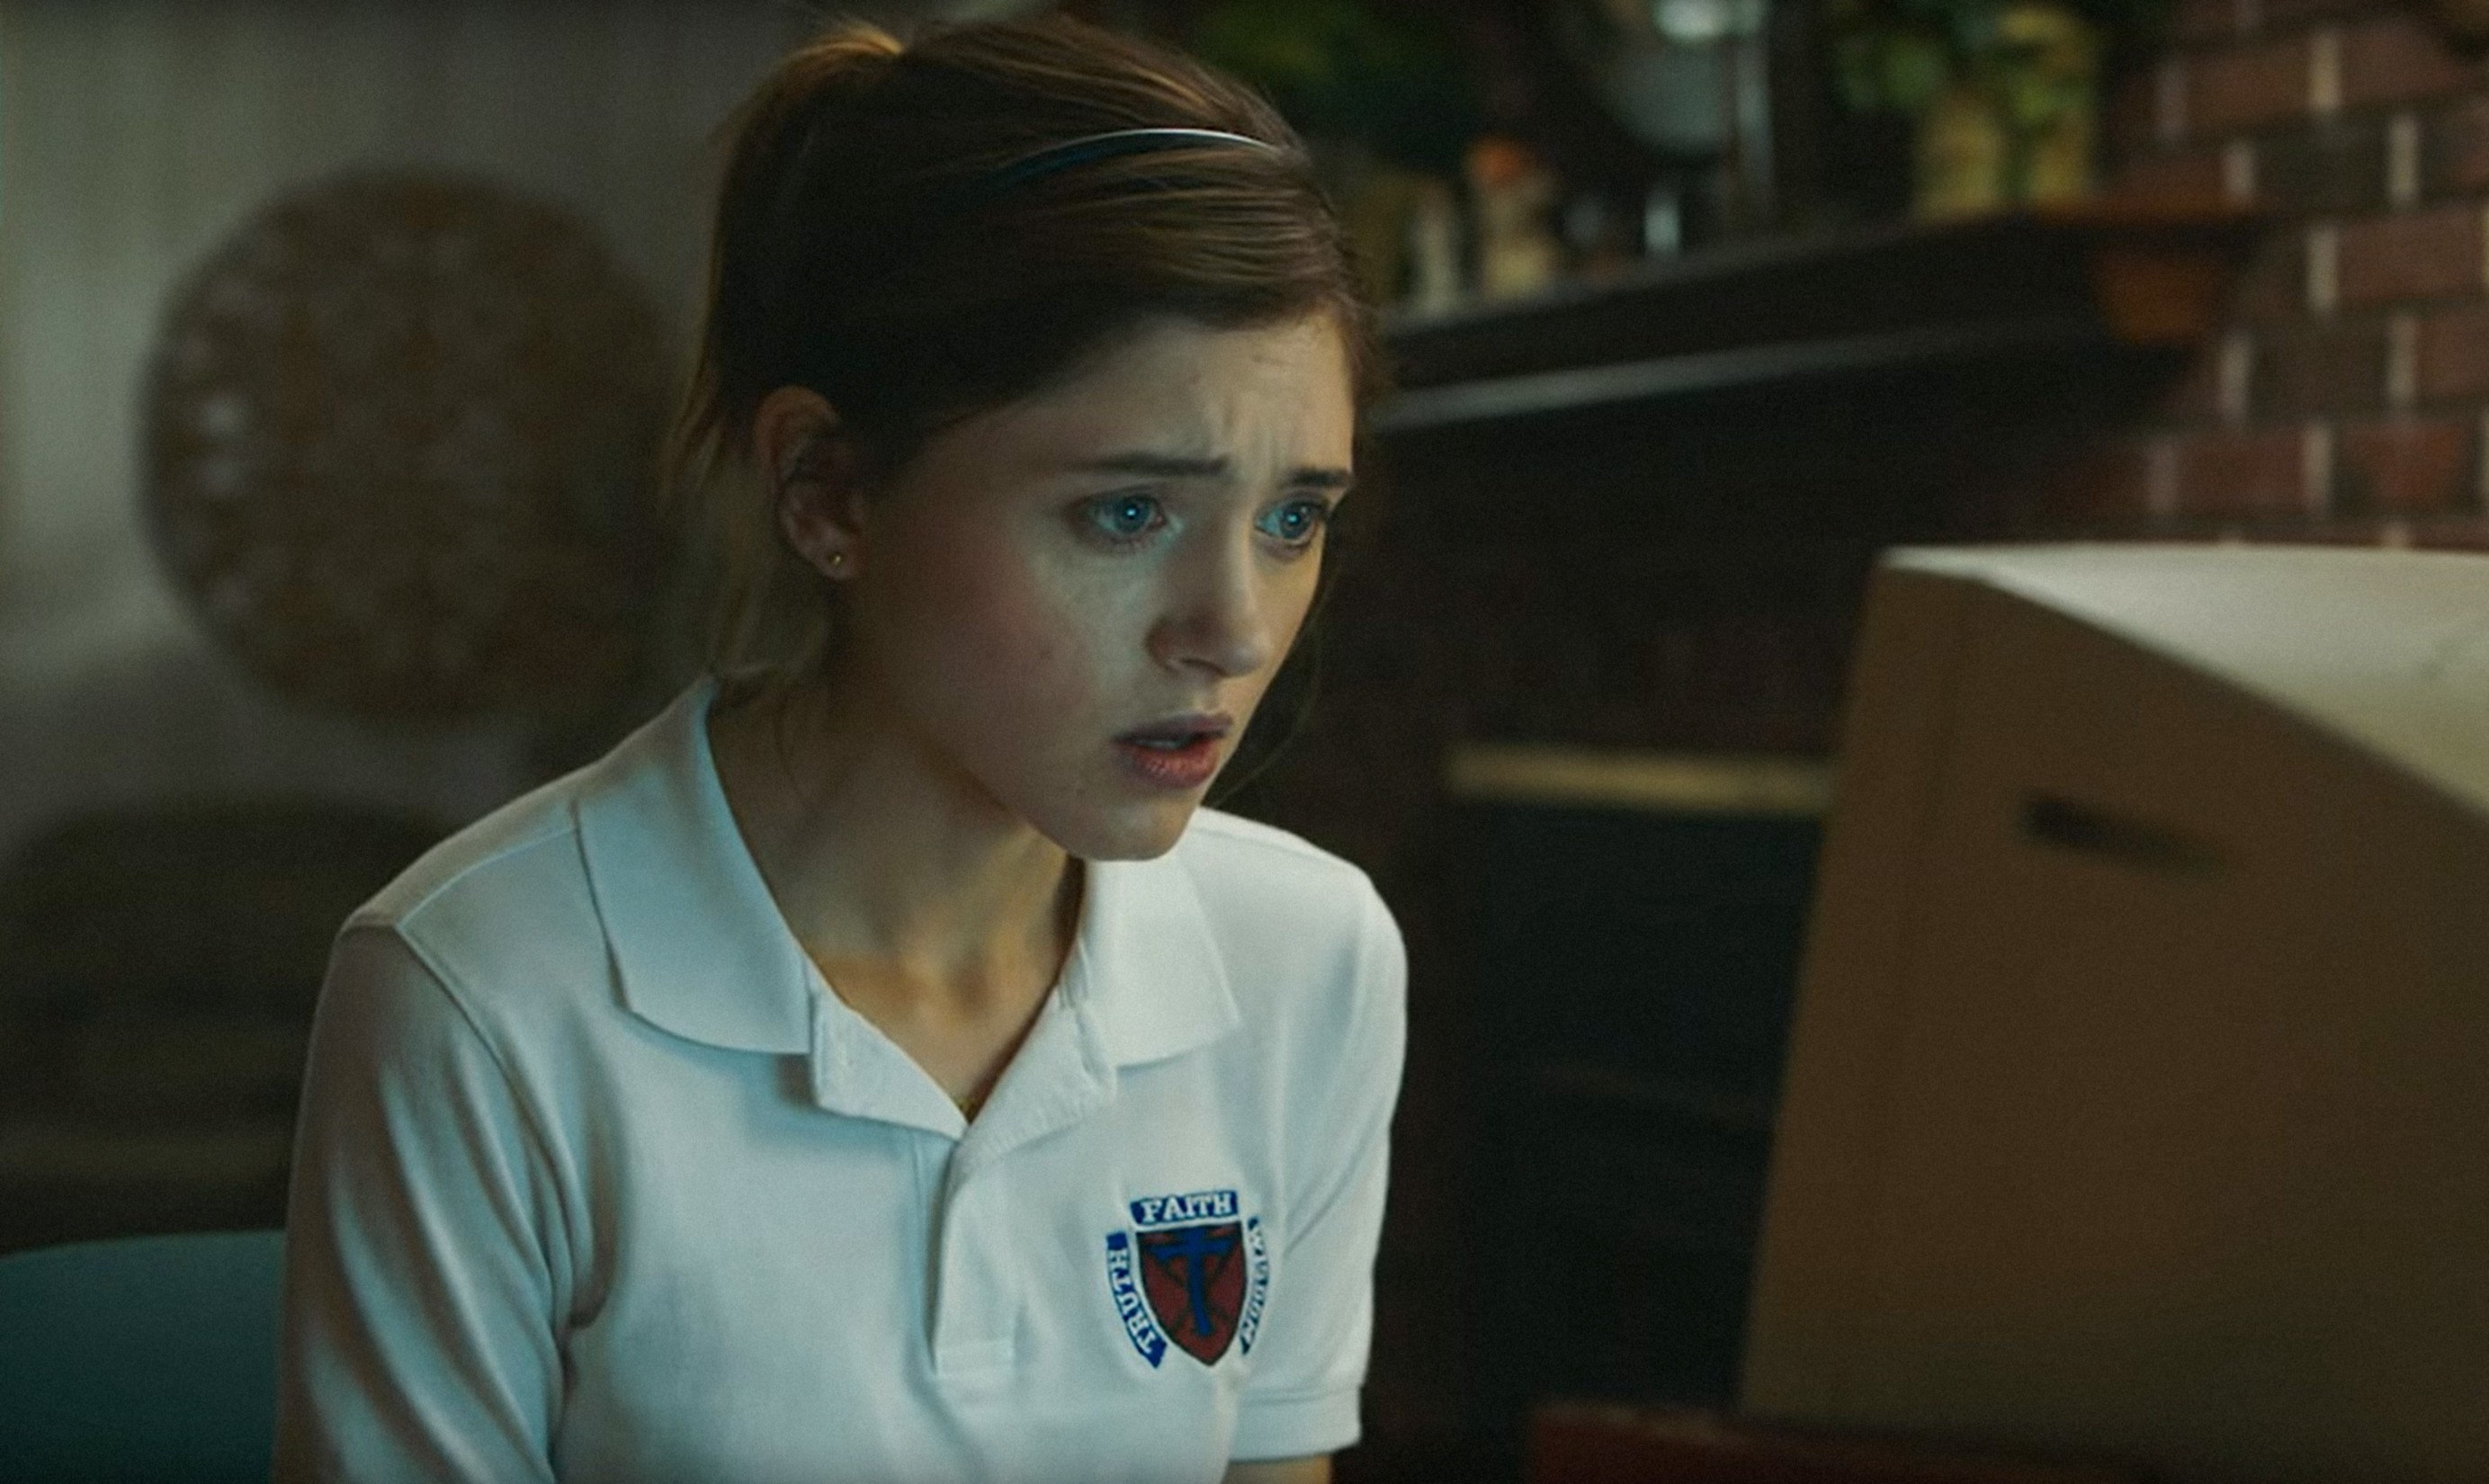 Natalia staring intensely at a computer screen in a scene from Yes, God, Yes